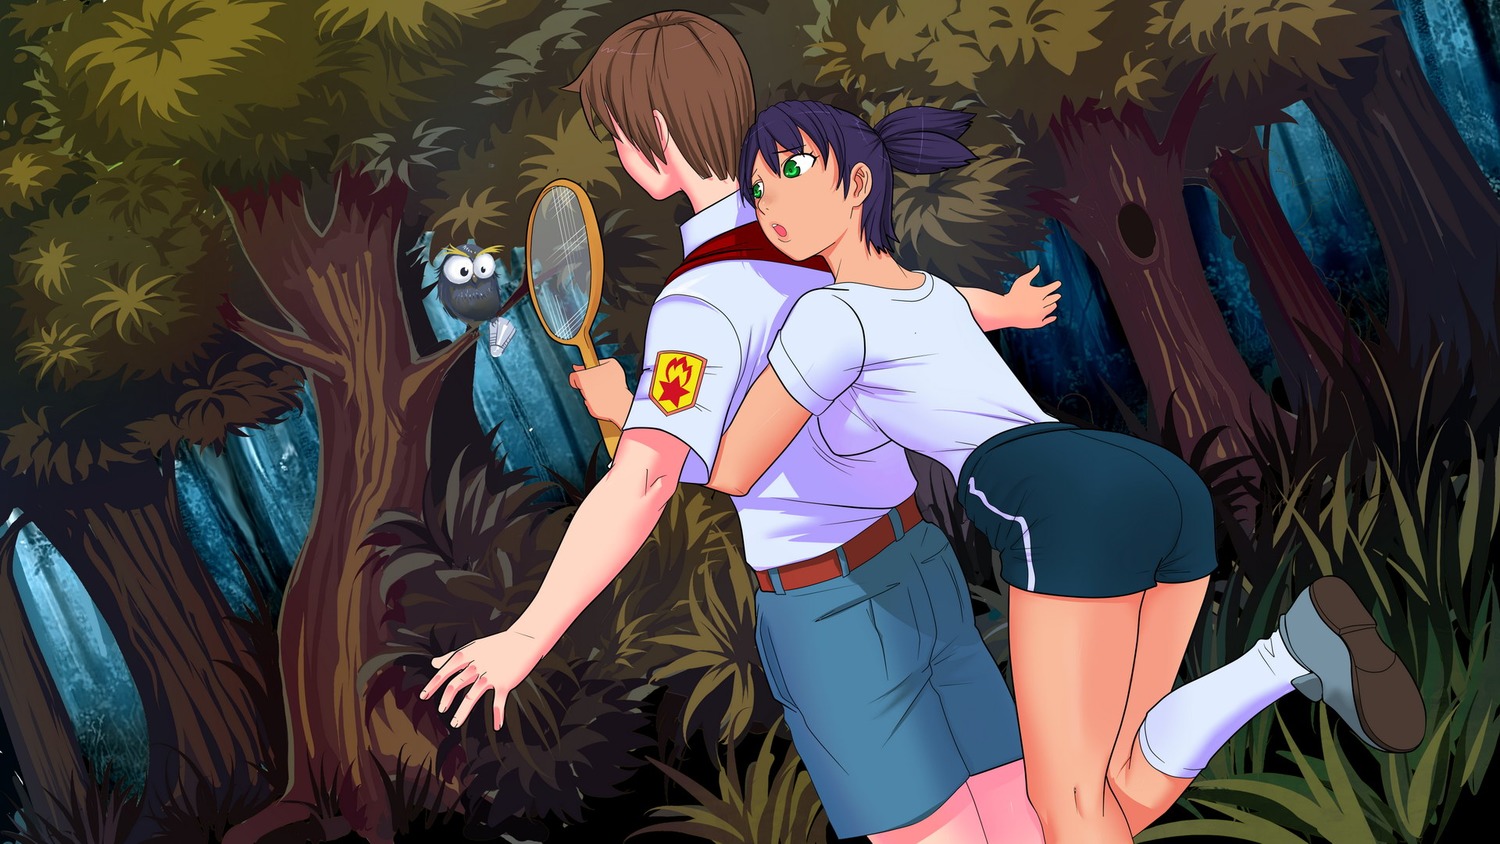 1boy badminton bird breasts brown_hair dutch_angle eroge forest game_cg green_eyes gym_uniform highres nature necktie night outdoors owl pants pioneer pioneer_tie pioneer_uniform possible_duplicate purple_hair racket scared semyon_(character) shirt short_hair shorts spread_arms tree t-shirt twintails unyl-chan